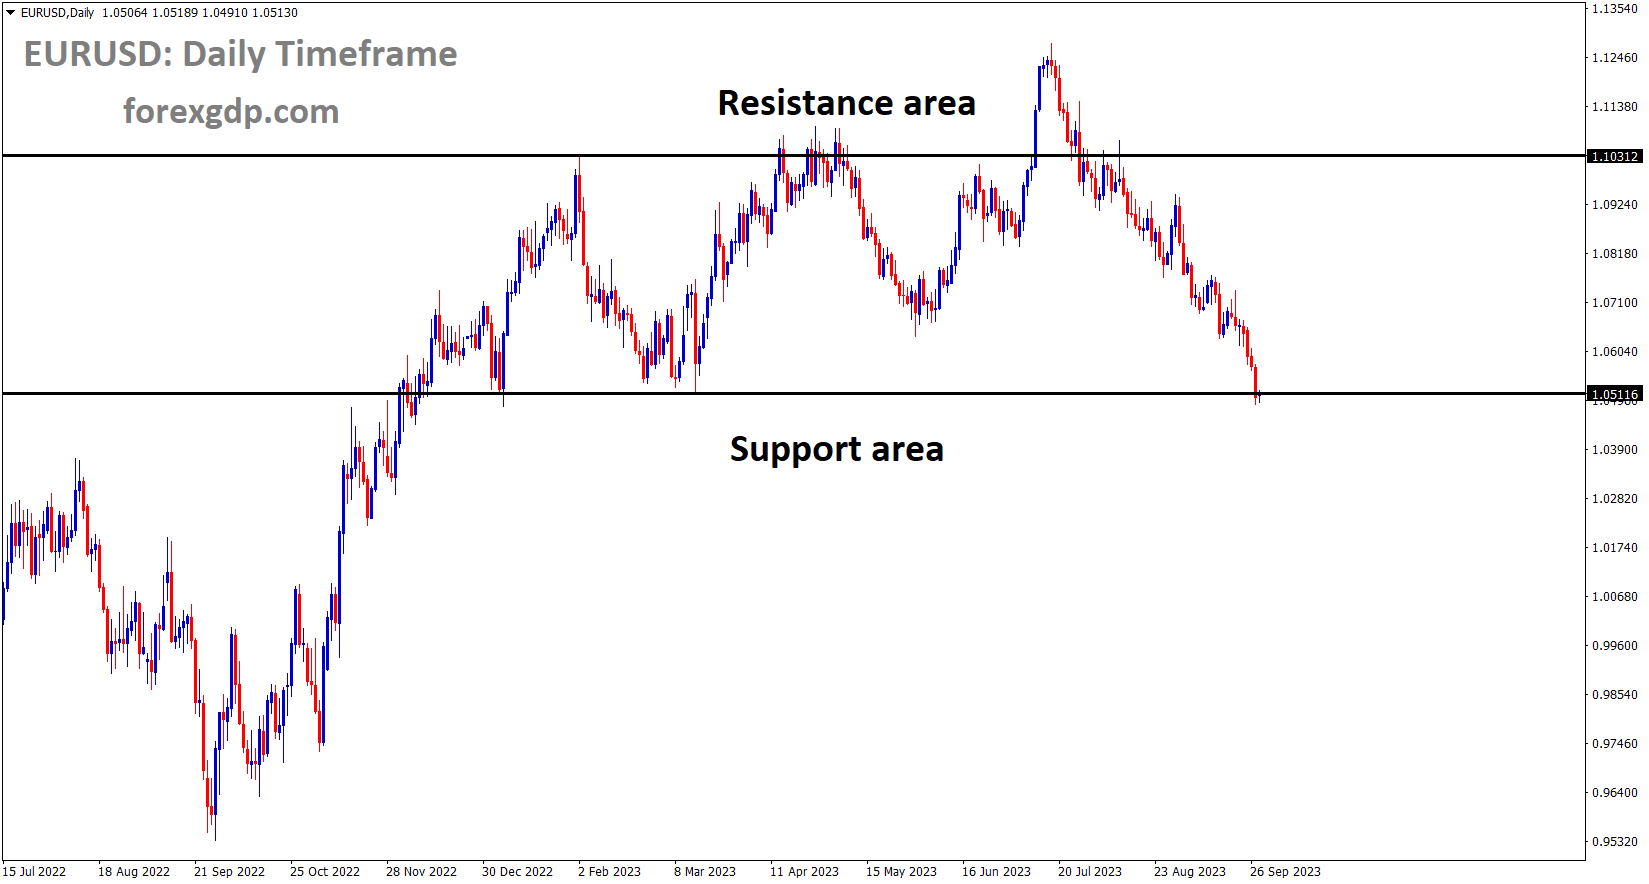 EURUSD is moving in the Box pattern and the market has reached the support area of the pattern